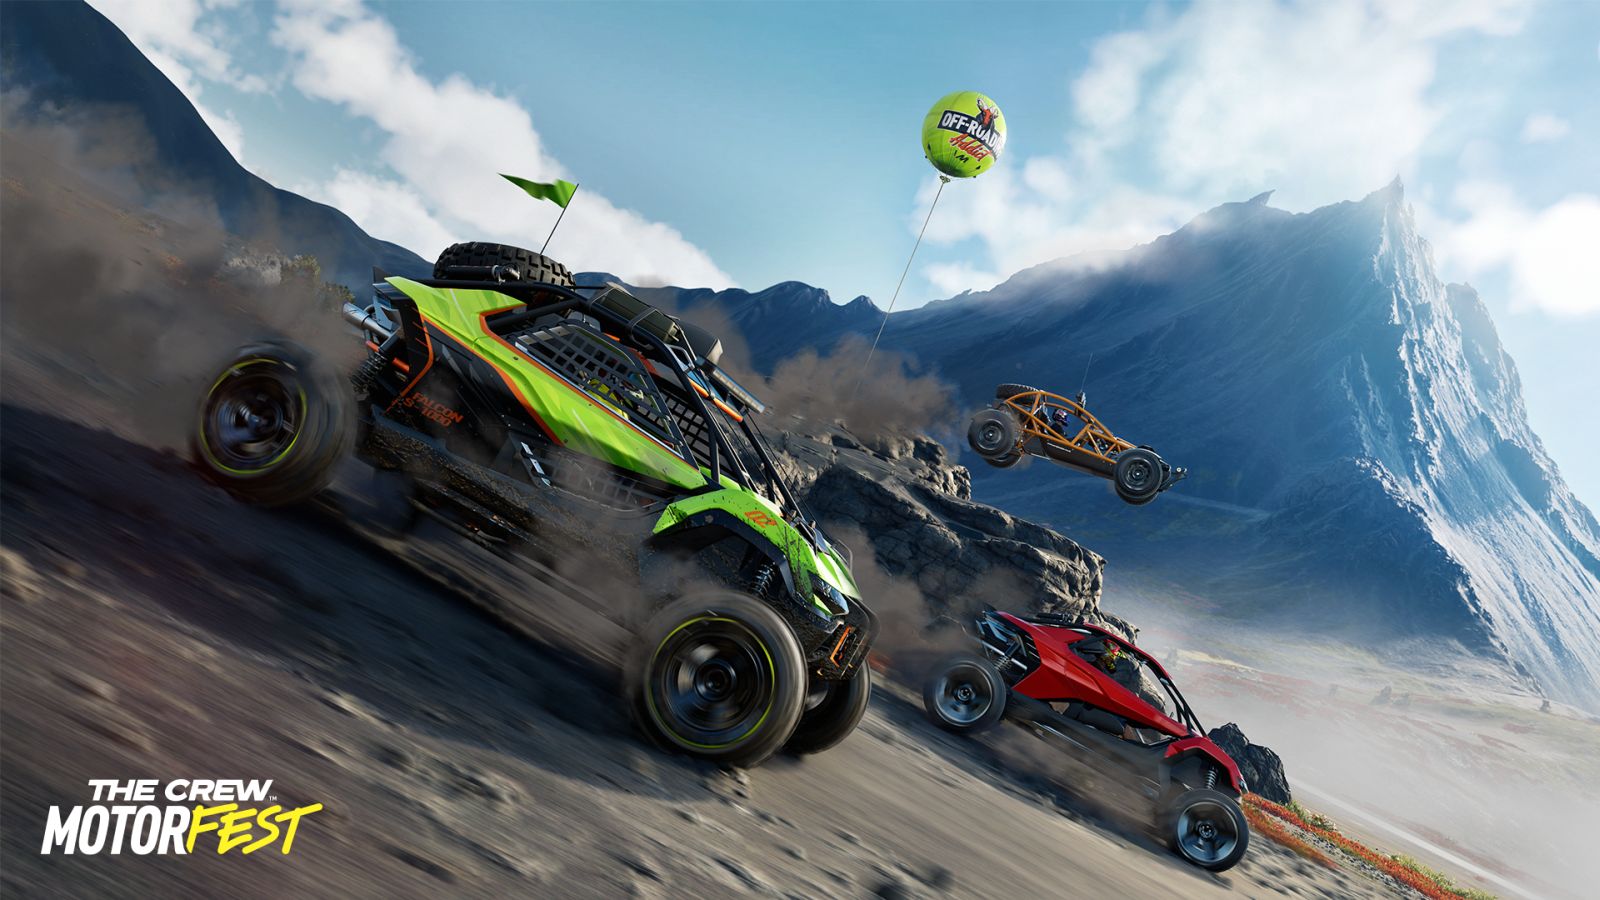 The Crew Motorfest hands-on preview — Revving my engine — GAMINGTREND